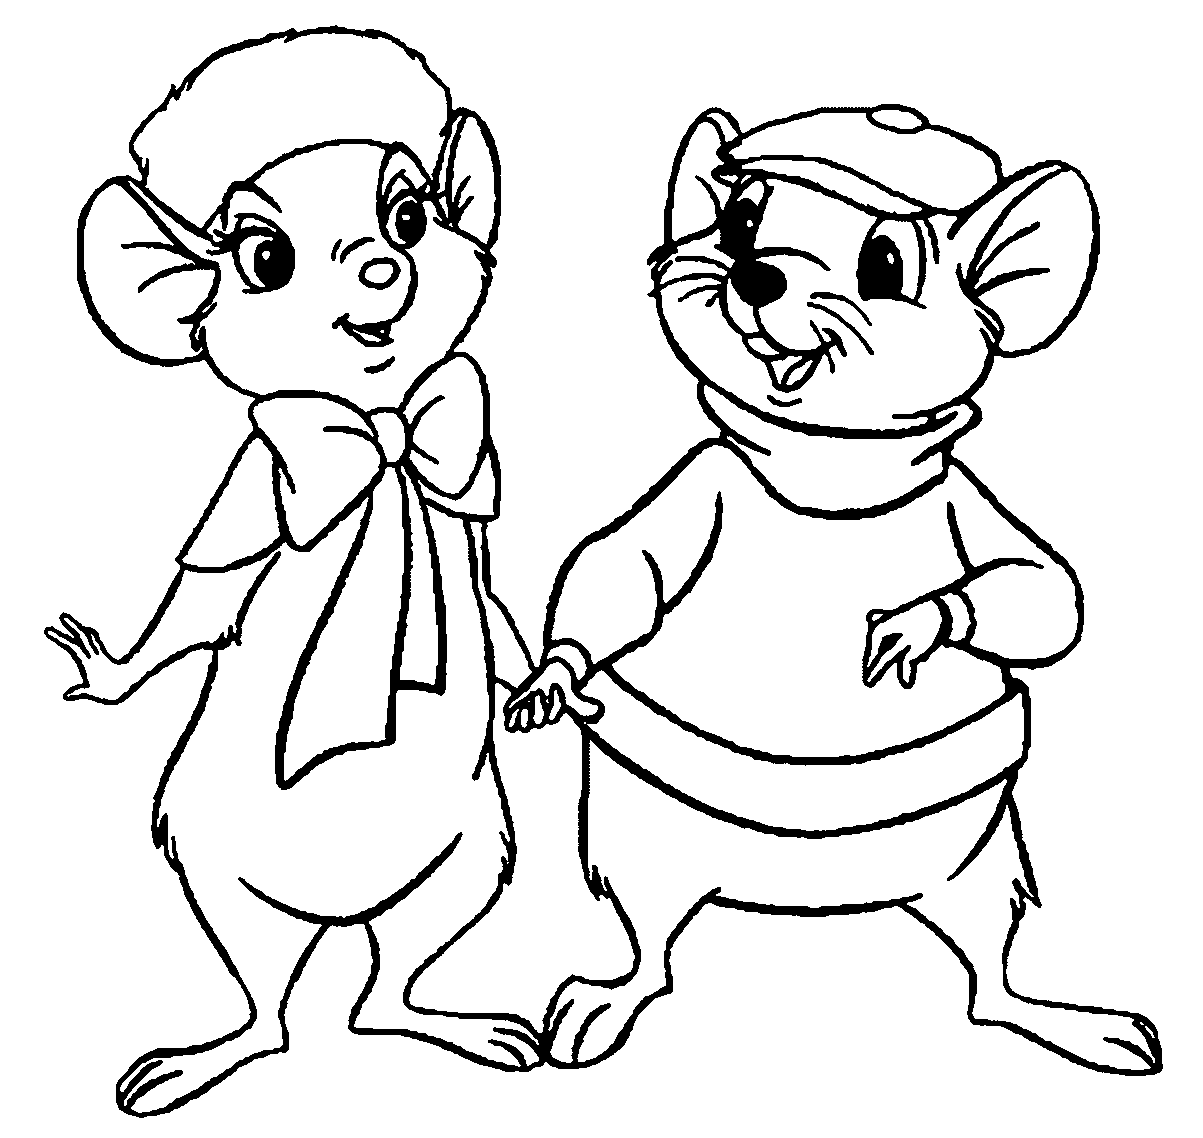 Bernard and Bianca holding hands Coloring Pages